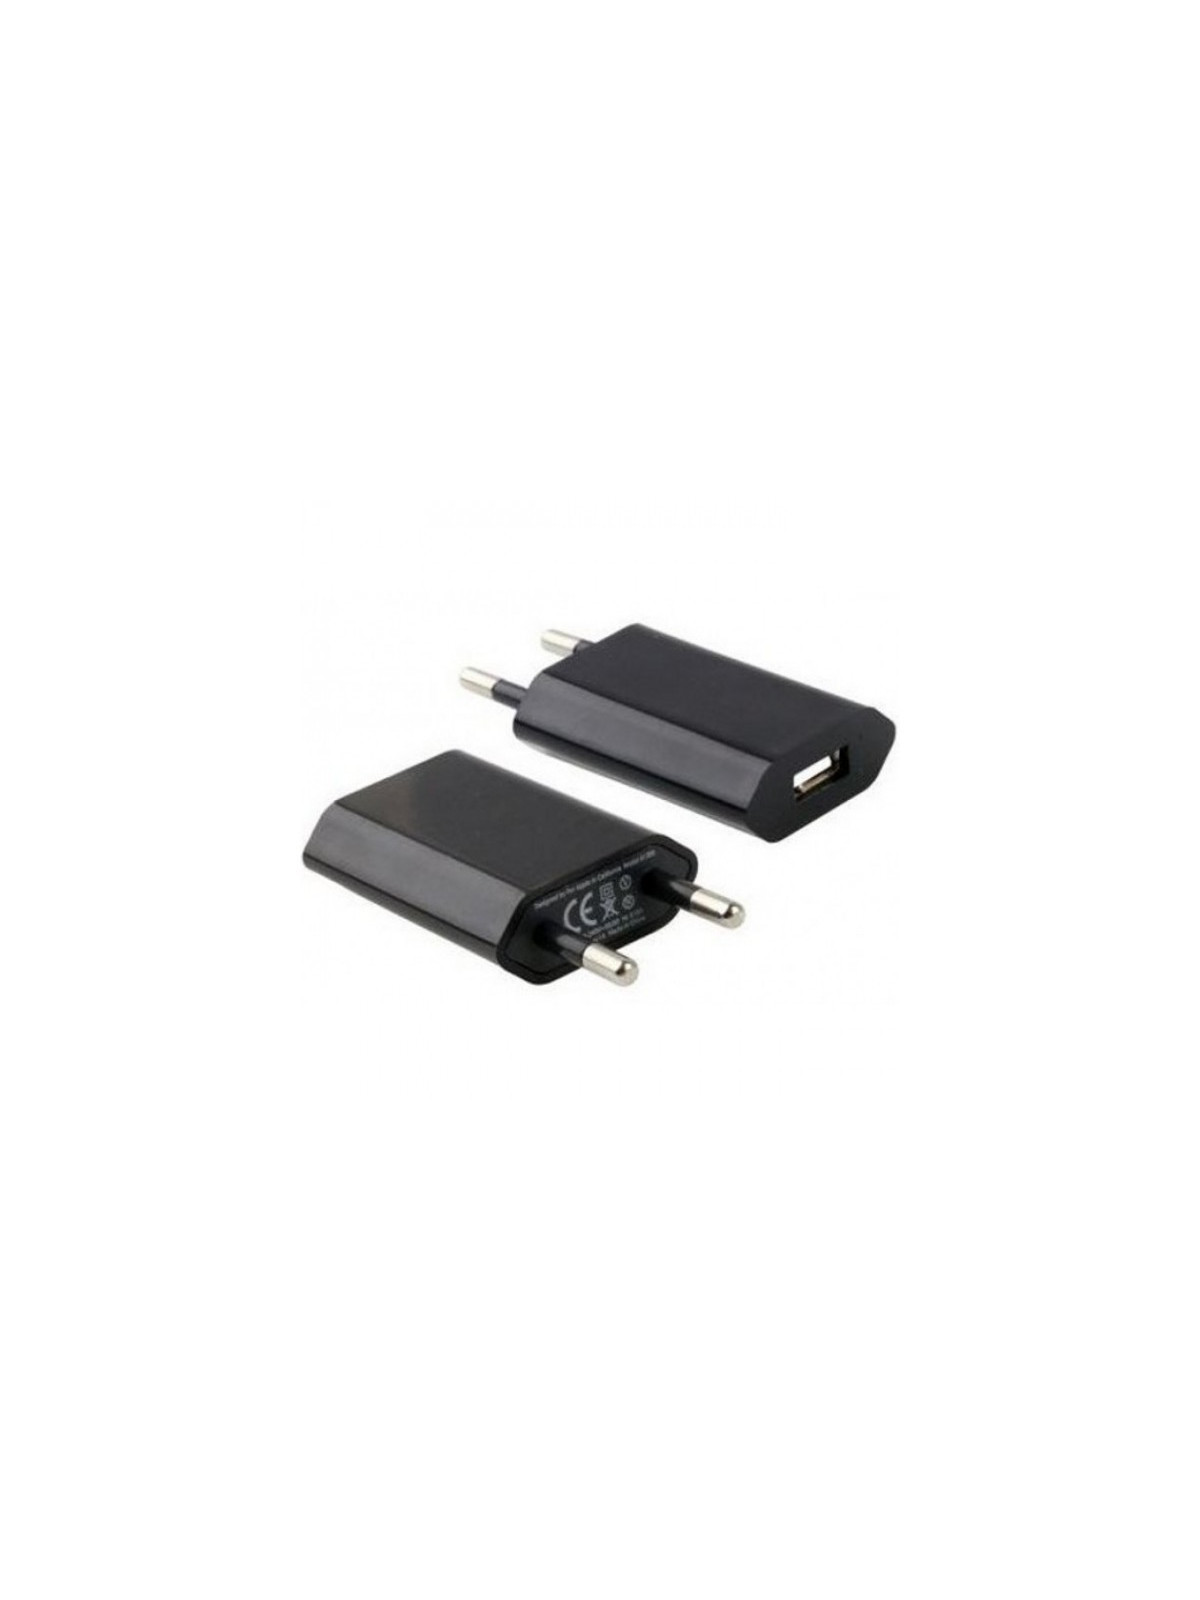 Chargeur bipolaire USB 5V - 1A - No